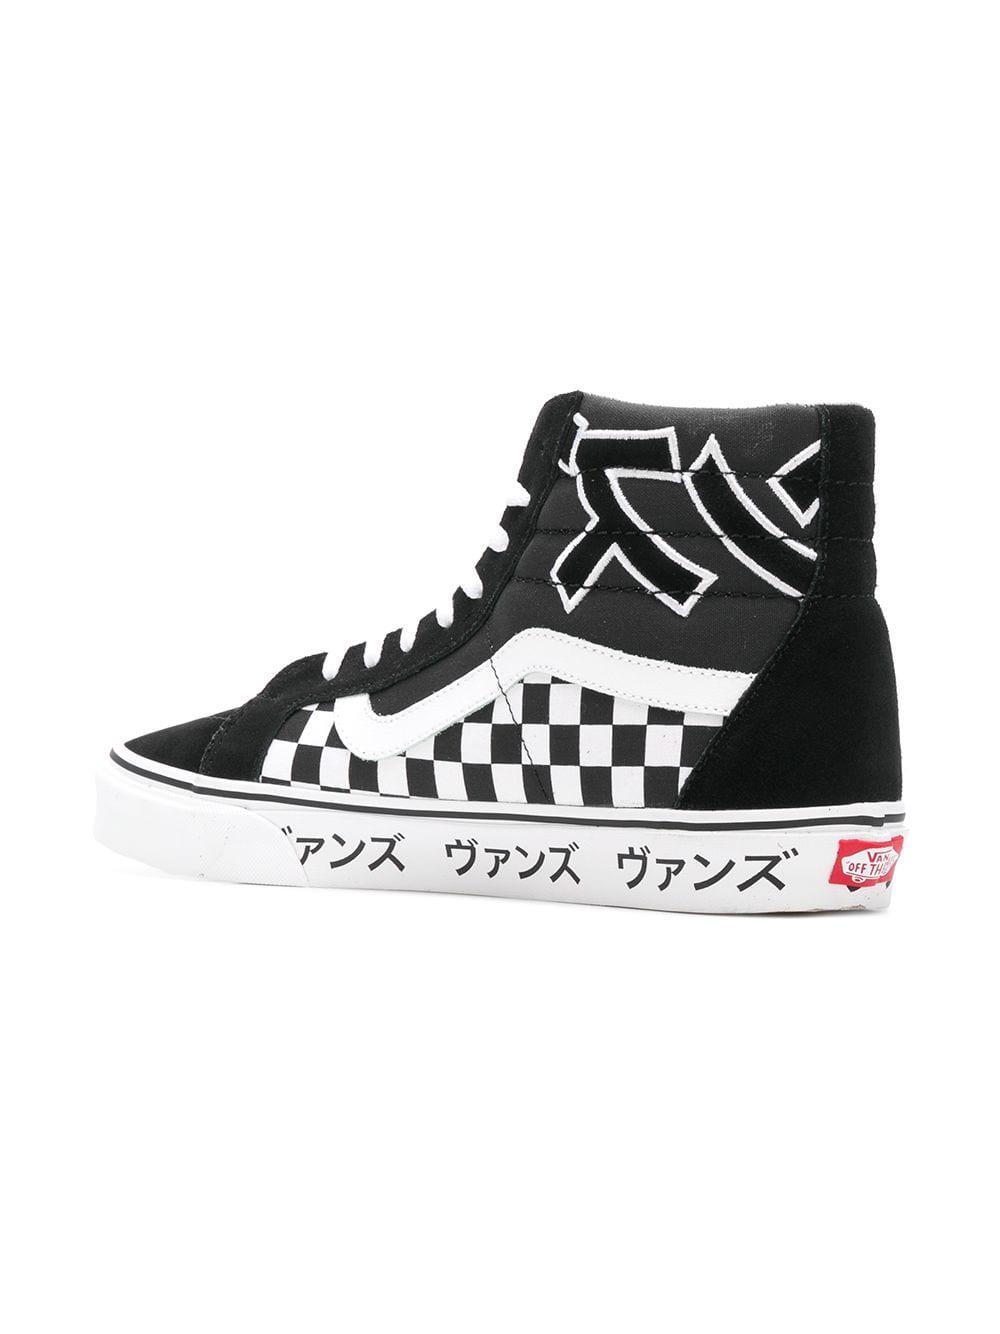 japanese vans meaning